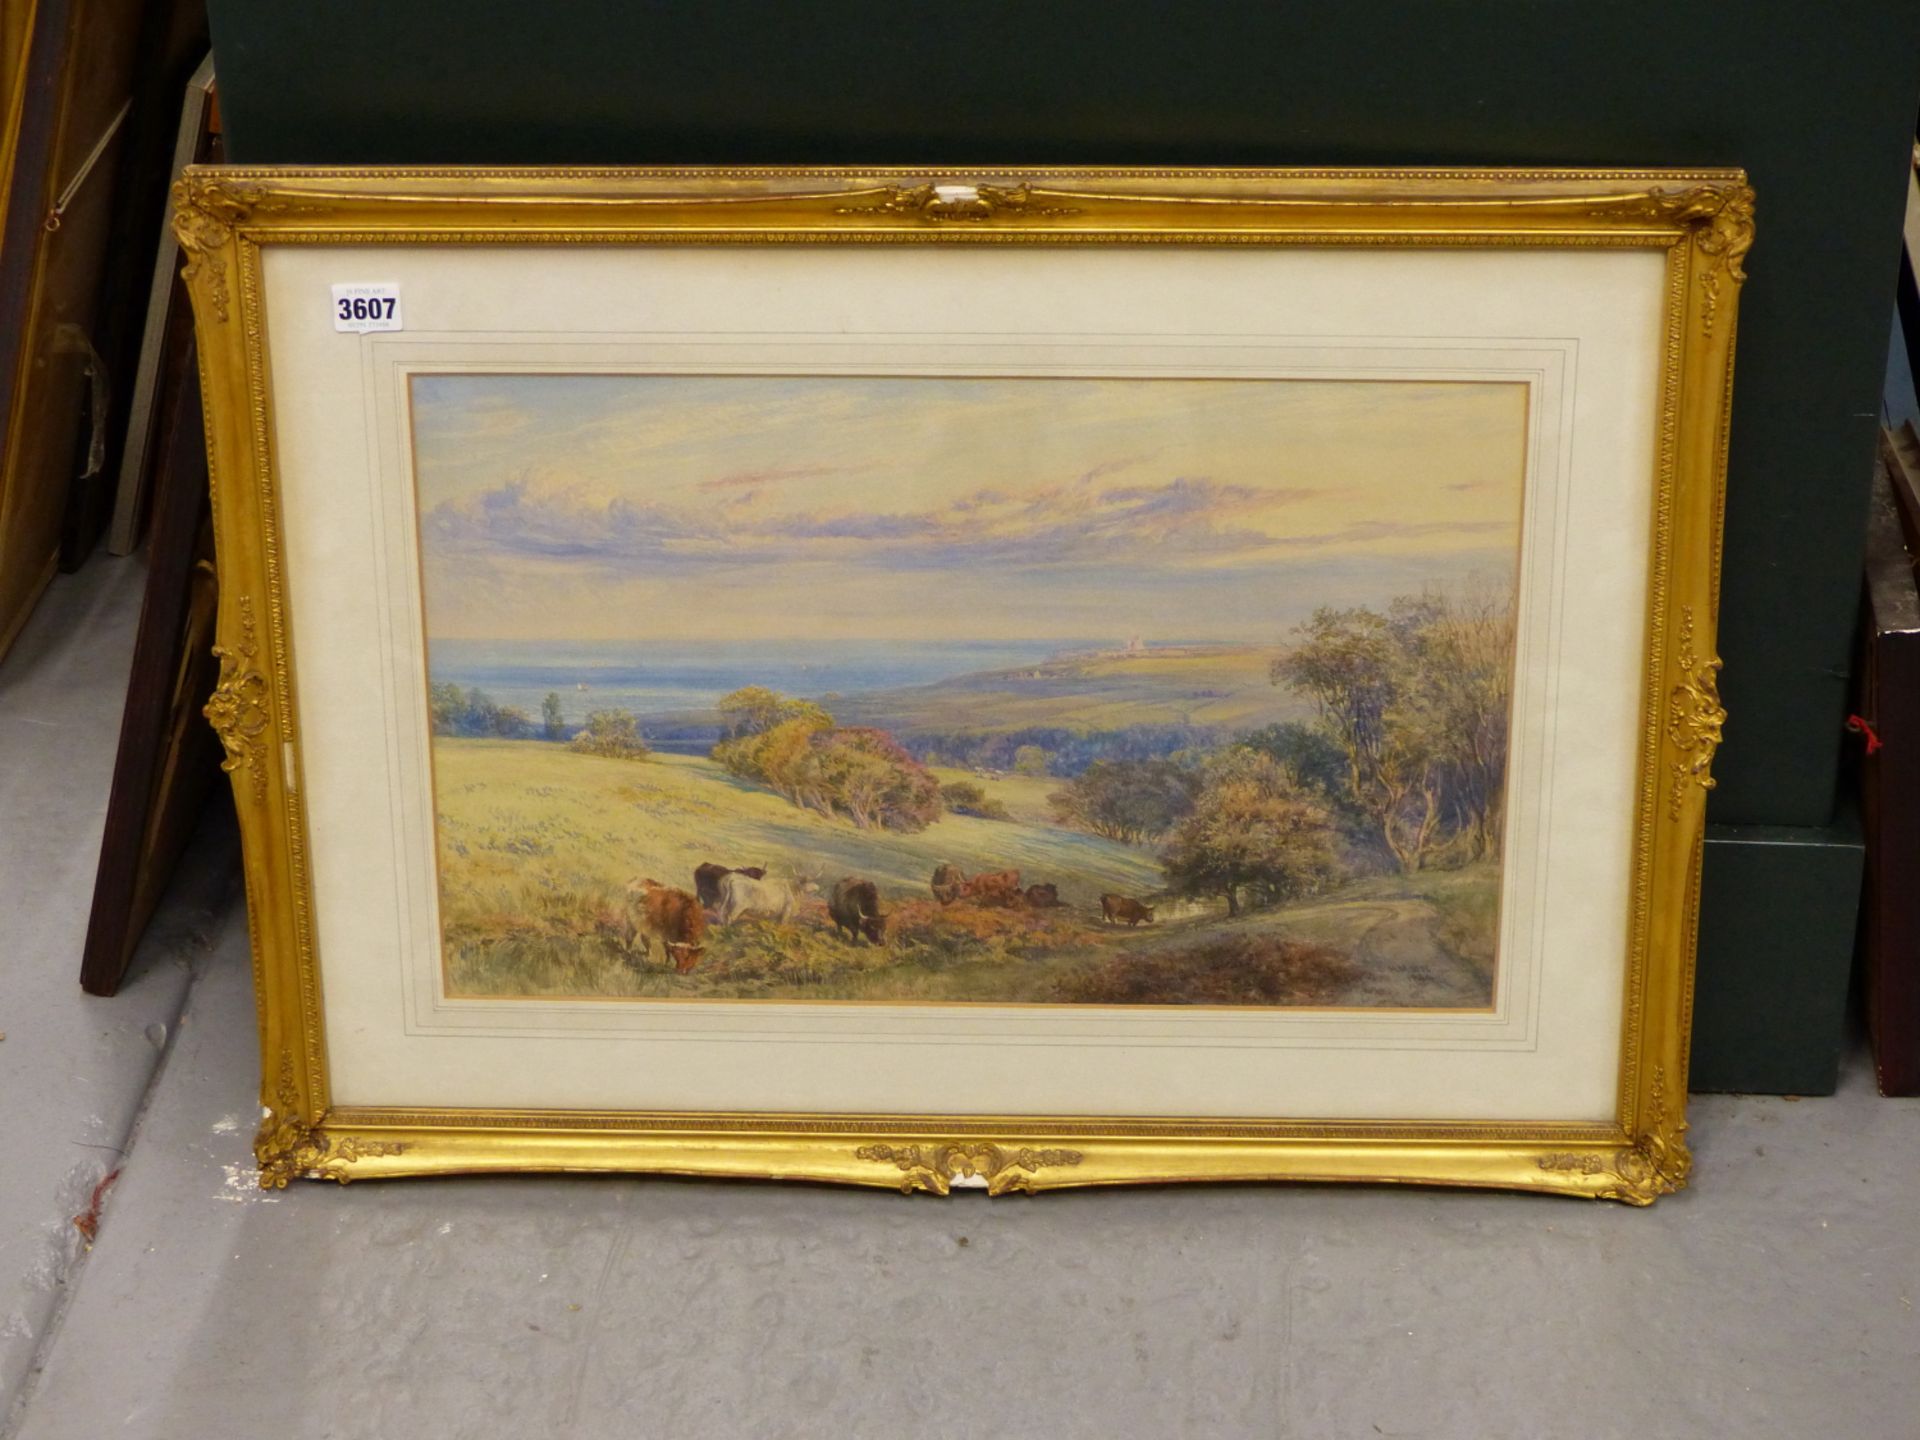 H. MOORE (RA) (1831-1895) COASTAL FIELDS WITH CATTLE, "WHITBY FROM MULGRAVE PARK" SIGNED AND DATED - Image 3 of 9